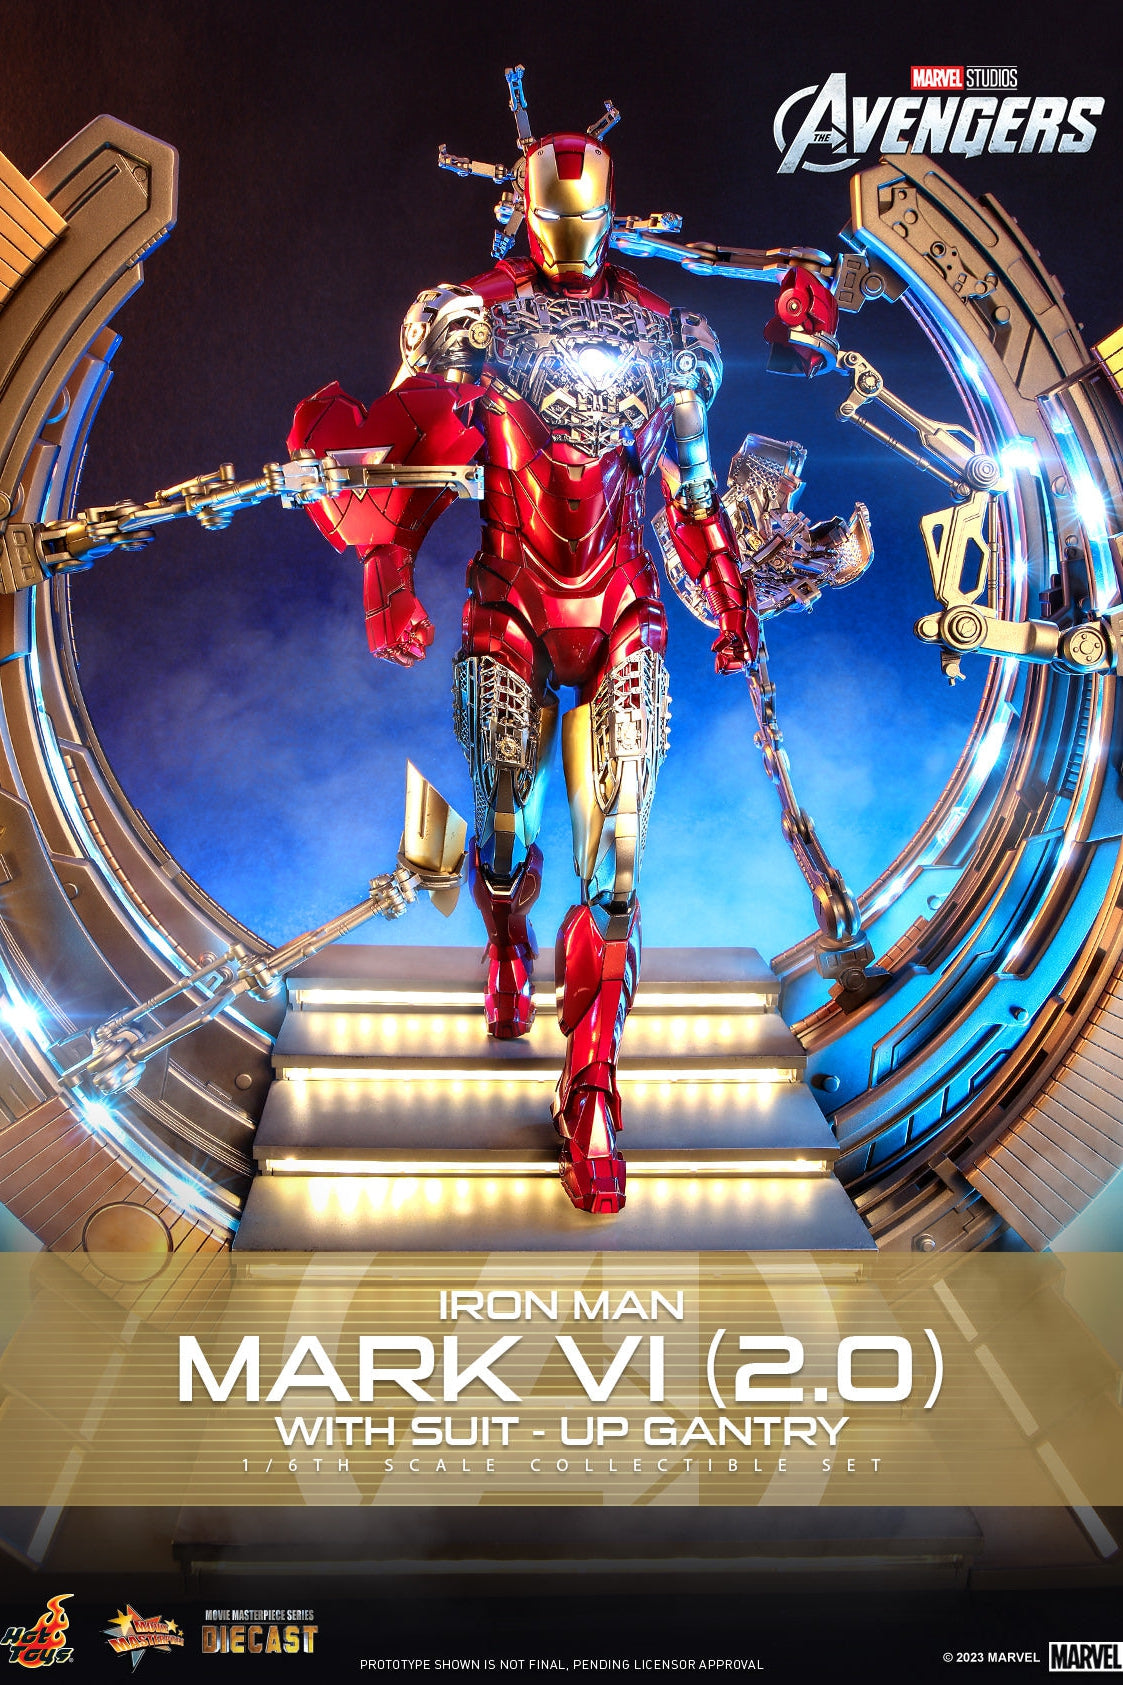 Iron Man: Mark VI (2.0): With Suit Up Gantry: Marvel: MMS688D53